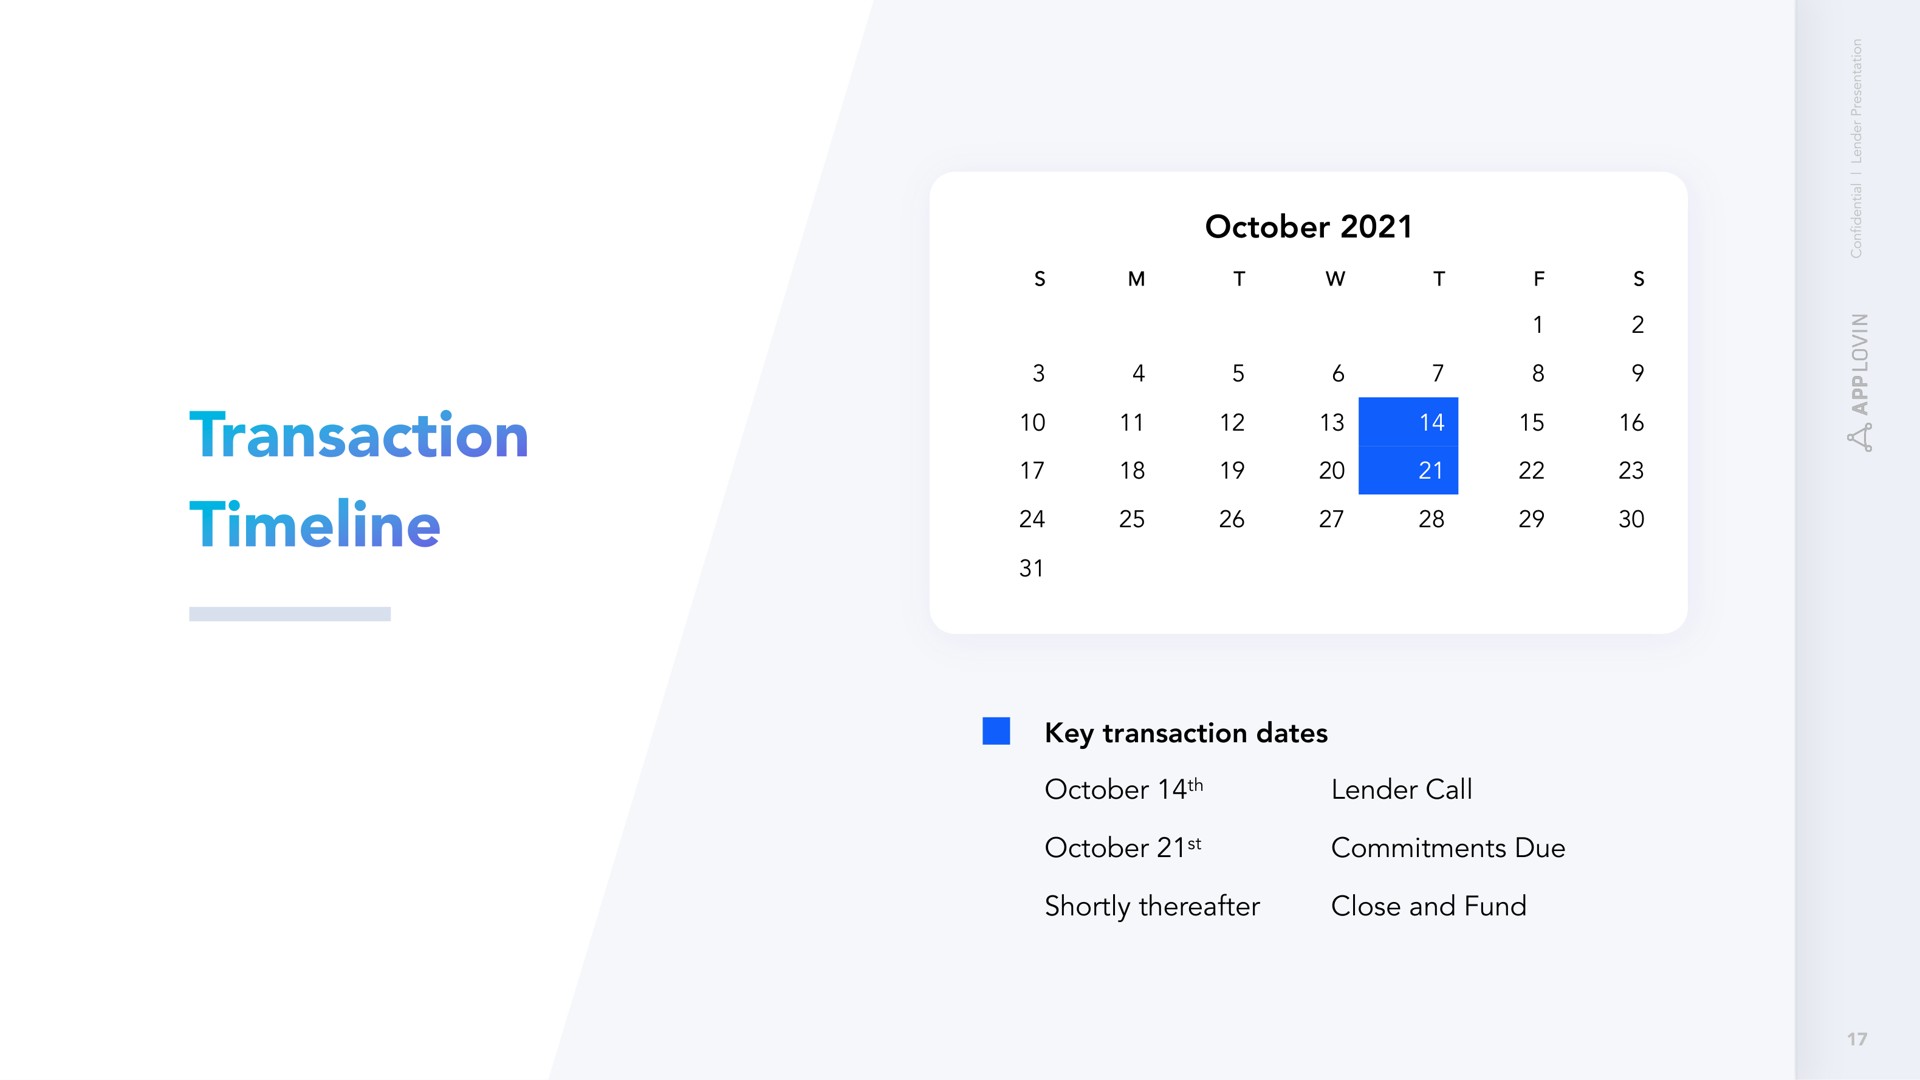 key transaction dates lender call commitments due shortly thereafter close and fund | AppLovin